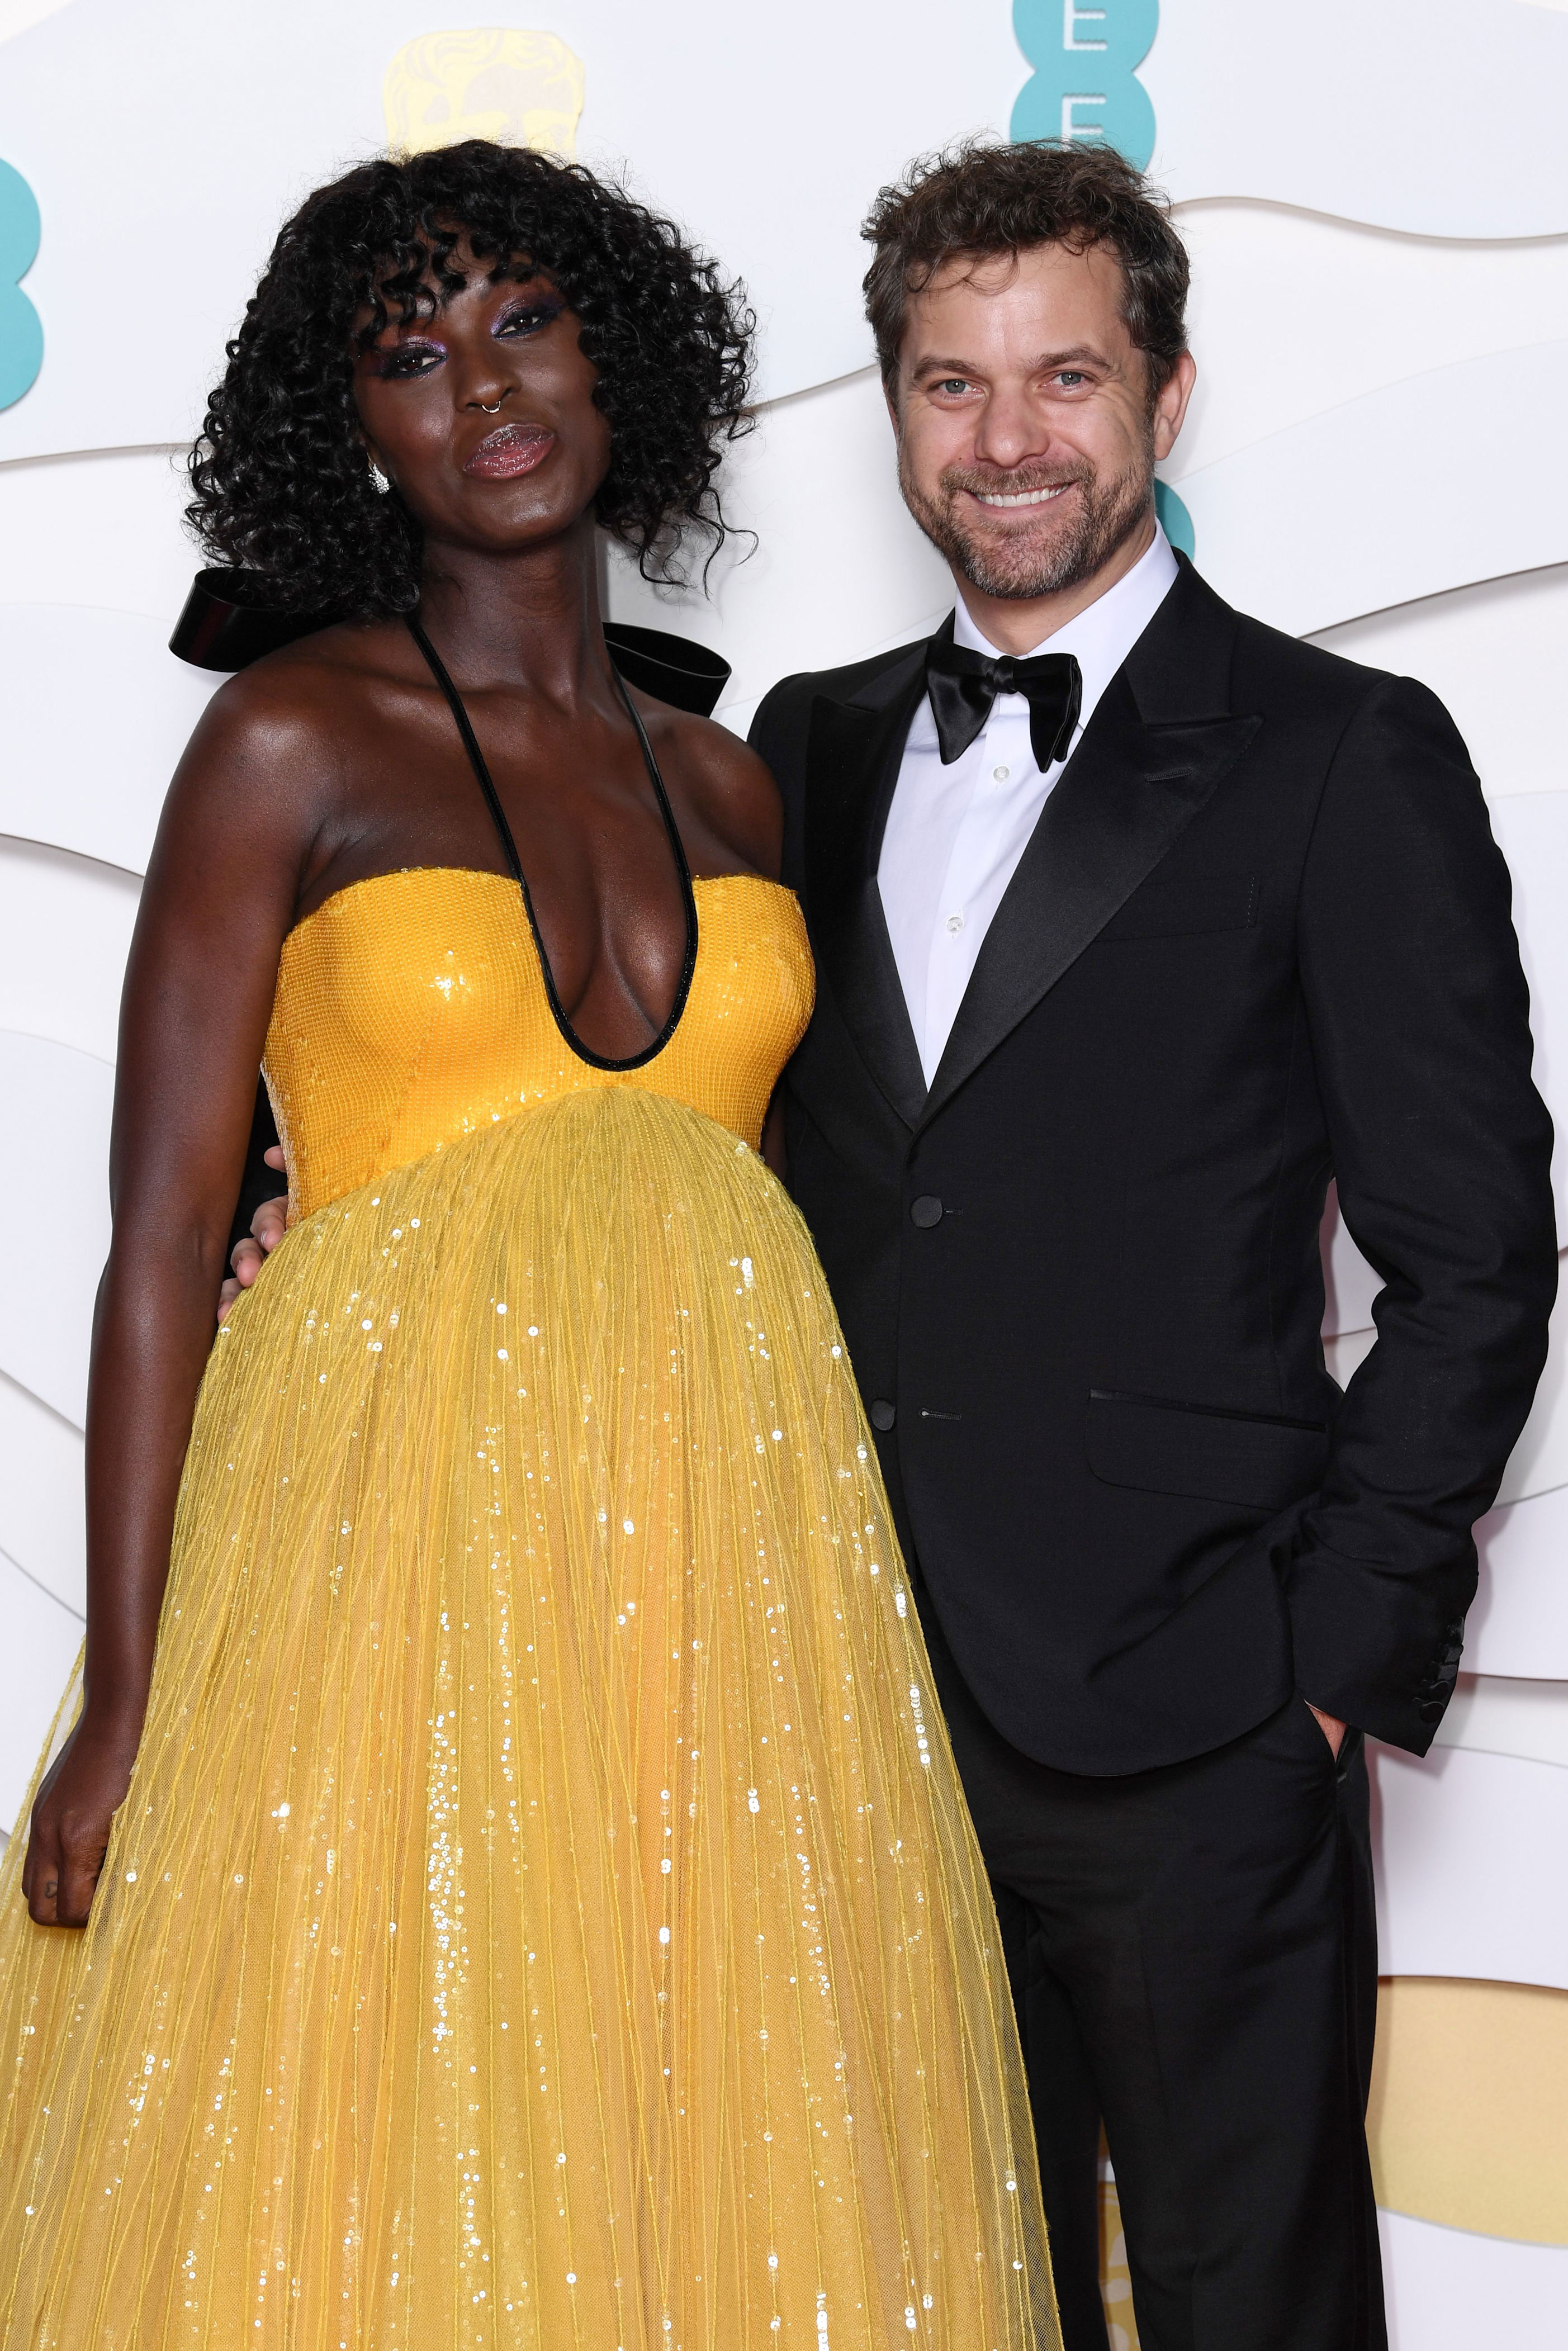 <p>Jodie Turner-Smith and <a href="https://www.wonderwall.com/celebrity/profiles/overview/joshua-jackson-1461.article">Joshua Jackson</a>'s four-year marriage might be over -- the British actress filed for divorce in October 2023 -- but their romance still had a fun beginning: They met at Usher's 40th birthday party in 2018. </p><p>"So when I first met my husband, it was kind of… we had a one-night stand," Jodie confessed during an appearance on <a href="https://www.youtube.com/watch?v=fSlIIHKfWq4">"Late Night With Seth Meyers"</a> in 2021. "We're in a two-, three-year one-night stand now." </p><p>She explained that sparks between her and the "Dawson's Creek" actor first flew at a party. "First of all, I saw him before he saw me and when I saw him, I was like, 'I want that,'" she explained. "And then when he saw me, I just pretended like I didn't see him. He had to yell across the room to me." </p><p>She was wearing a T-shirt that had been worn by a character named Detroit in the movie "Sorry to Bother You" and Josh recognized it. "And so he shouts across the room, 'Detroit!' He comes over and he's like, "Hey," and does this really cute, charming thing that he does and just all night -- he just basically followed me around the party."</p><p>Joshua later said on "Watch What Happens Live" that he knew Jodie was "the one" when "she walked into the room looking like that."</p>